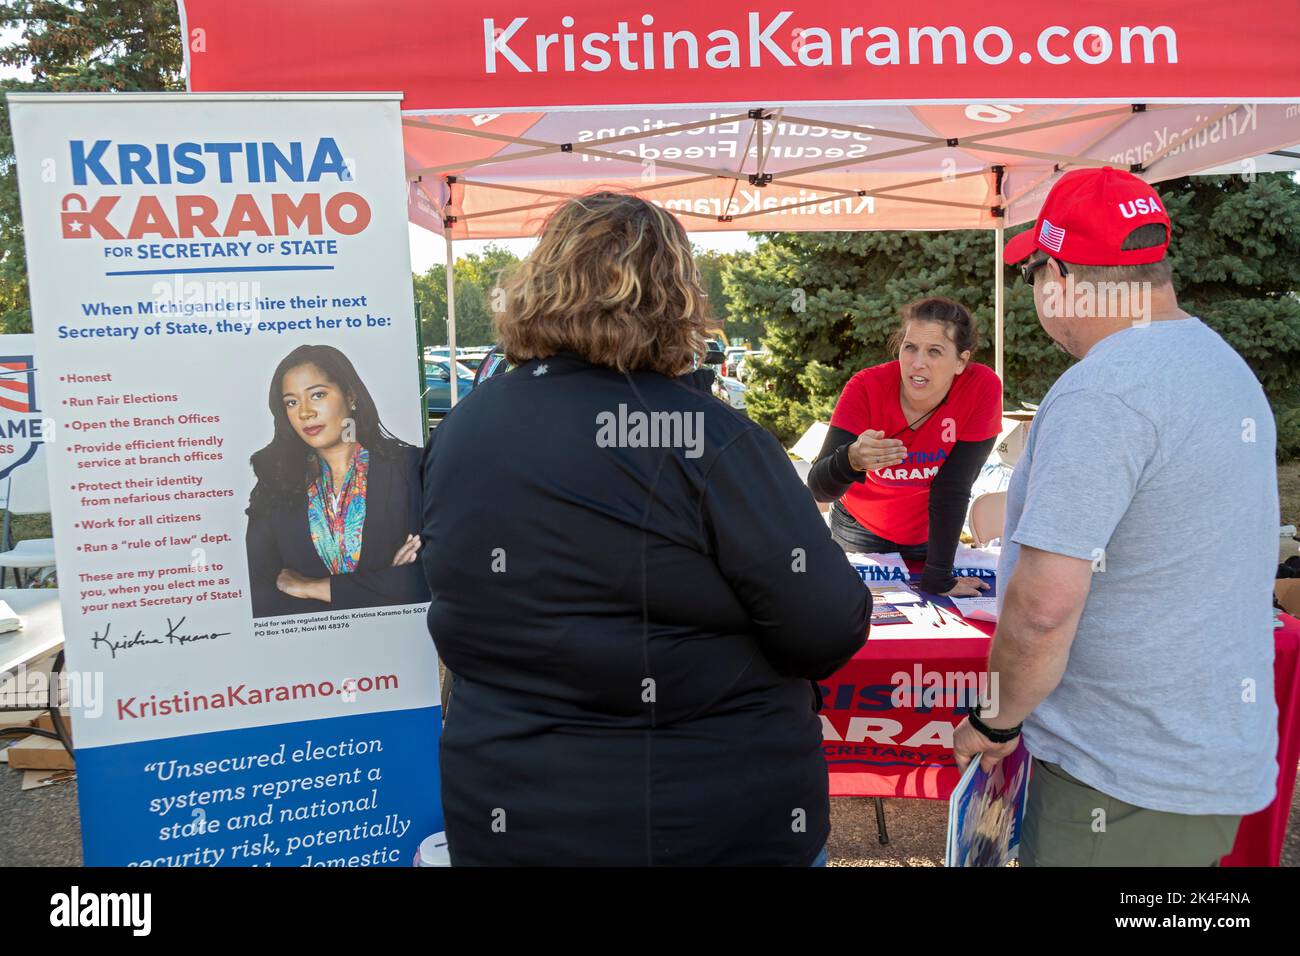 Warren, Michigan, USA. 1st Oct, 2022. A supporter of Kristina Karamo, who is the Republican candidate for Michigan Secretary of State, campaigns outside a Donald Trump rally. Trump is supporting Tudor Dixon, Matt DePerno, and Kristina Karamo, Republican candidates for (respectively) Michigan governor, attorney general, and secretary of state. Credit: Jim West/Alamy Live News Stock Photo